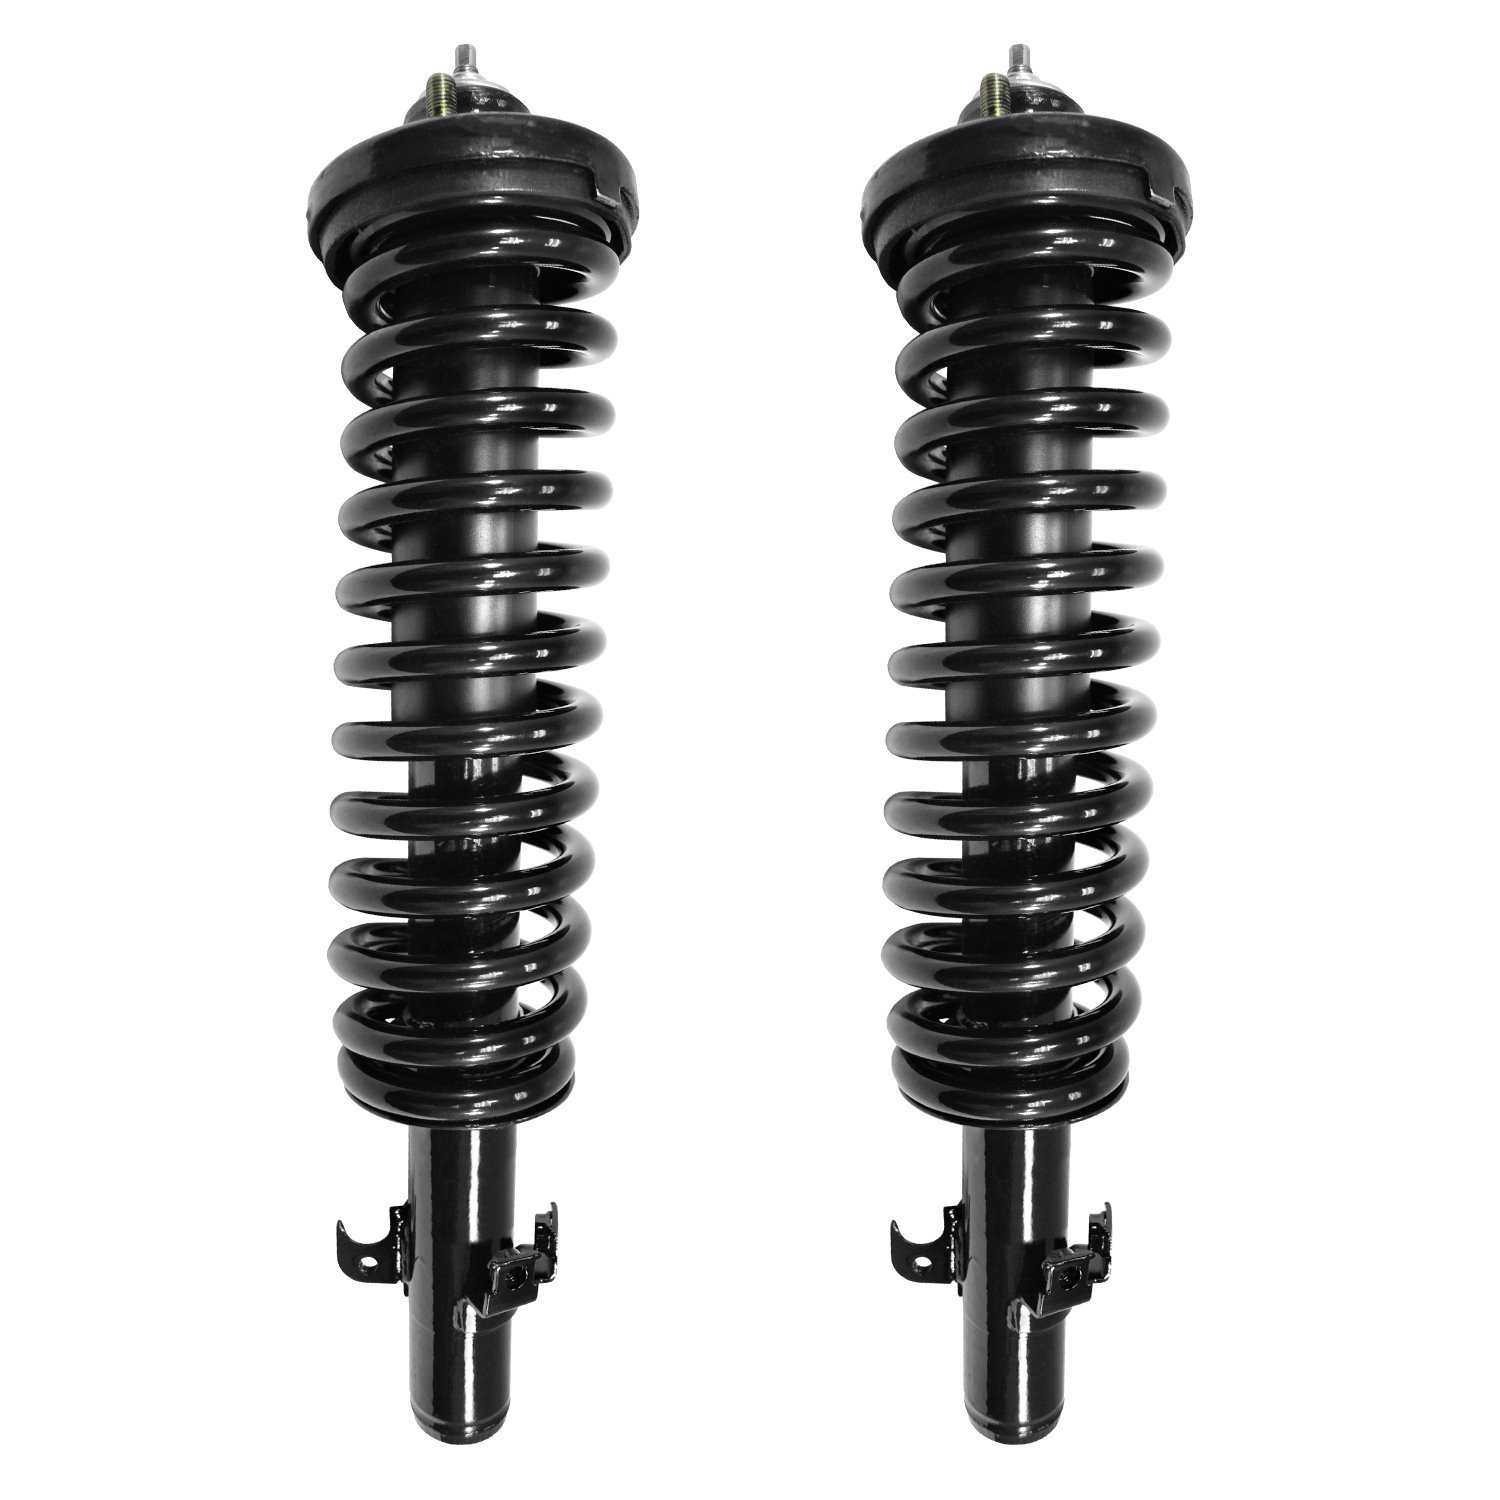 2-11140-001 Suspension Strut & Coil Spring Assembly Set Fits Select Honda Accord